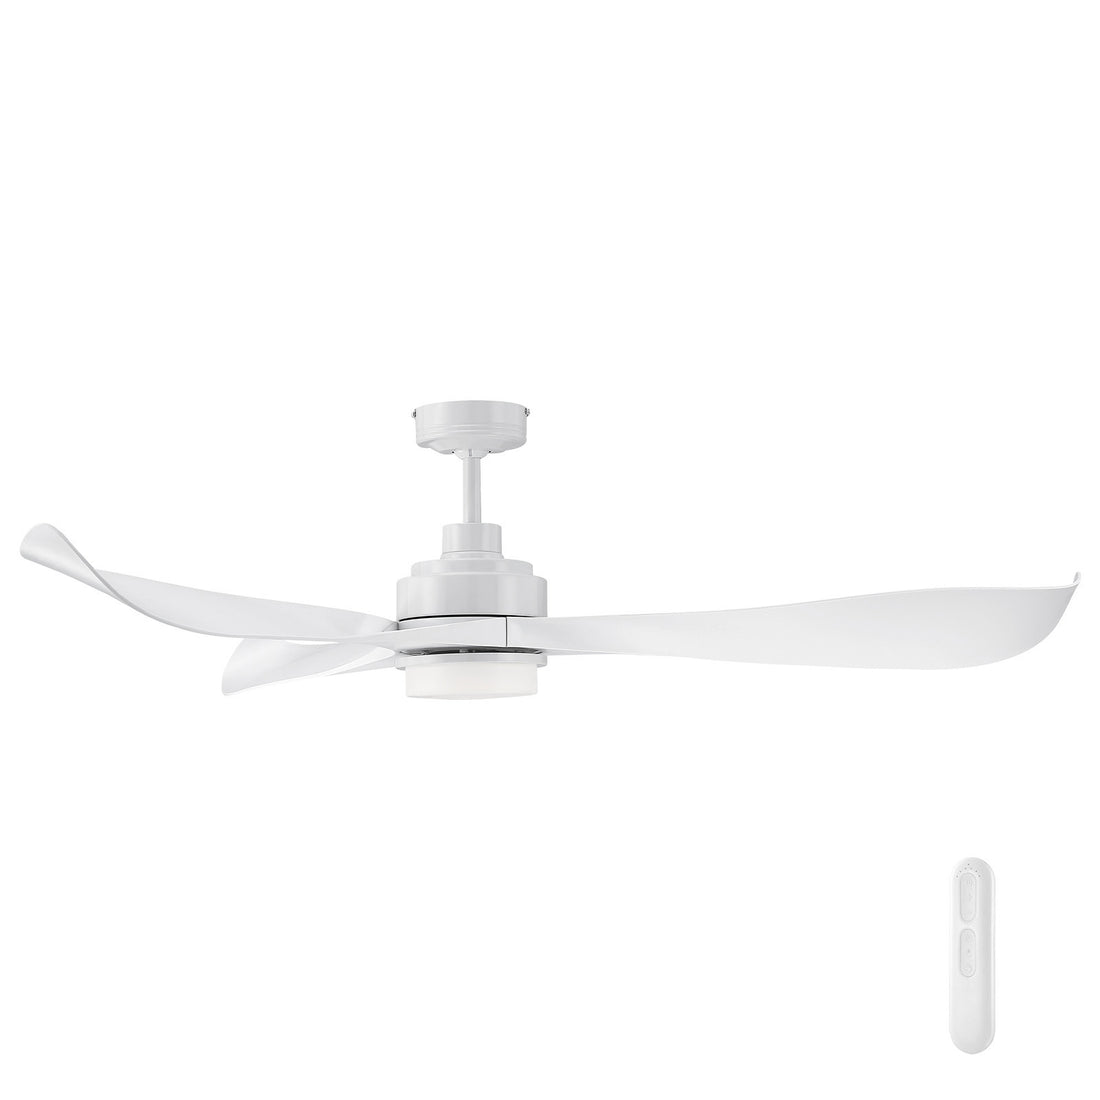 Eagle 141cm DC Ceiling Fans with LED Light and Remote